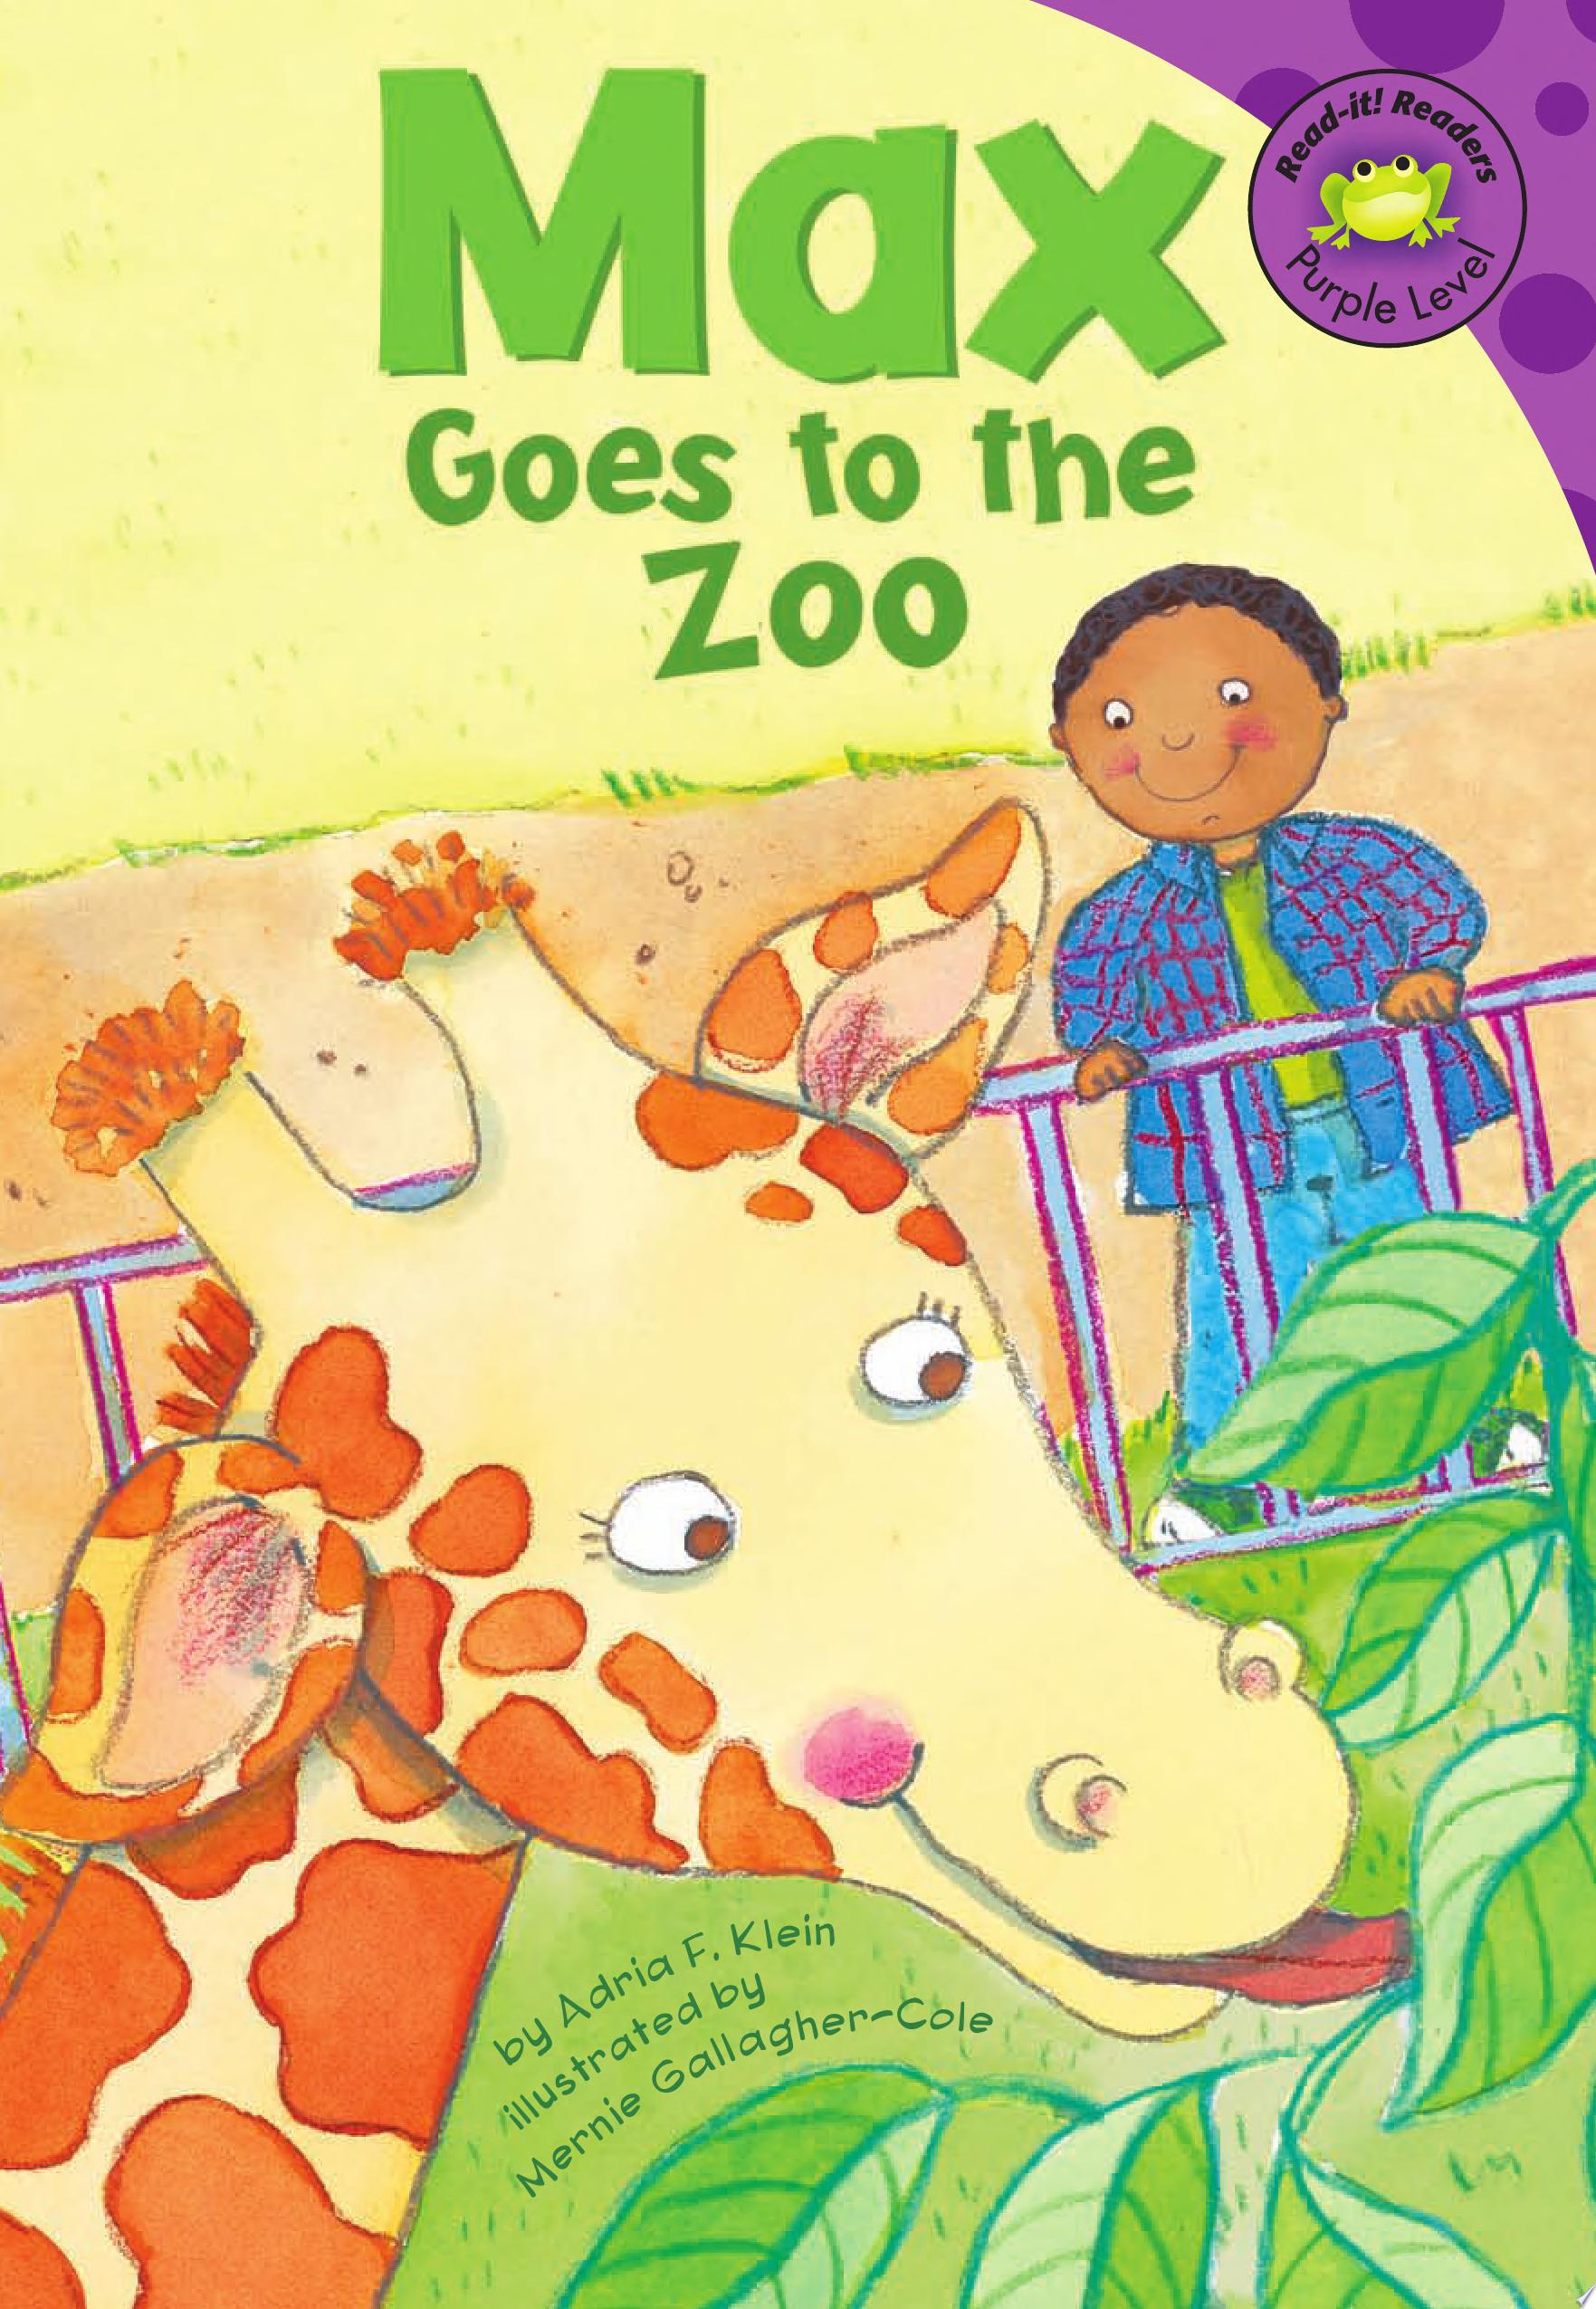 Image for "Max Goes to the Zoo"